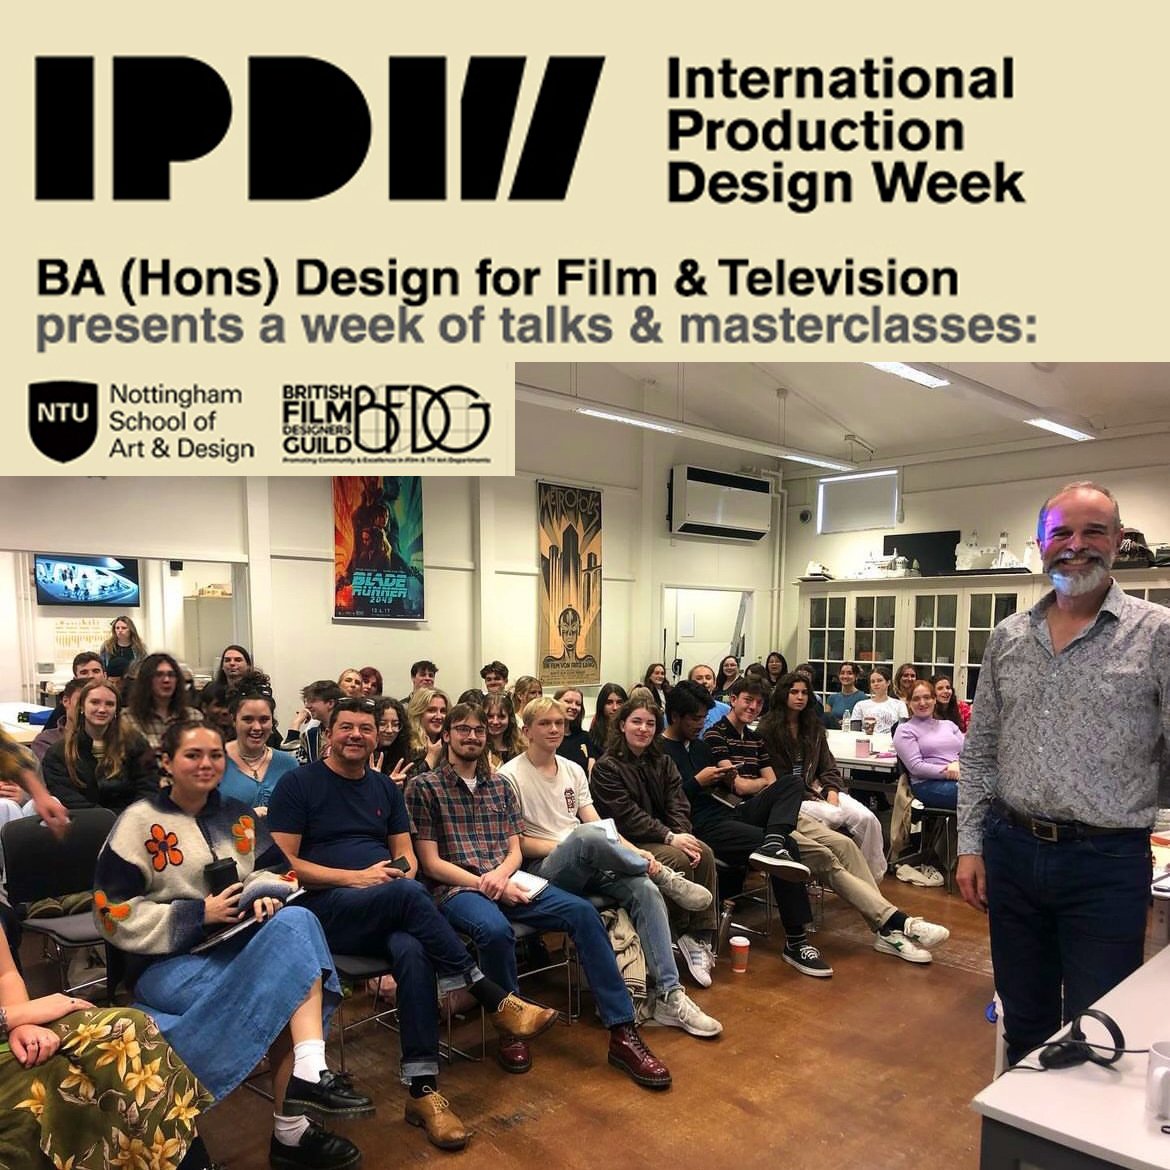 LECTURE AT NTU FOR INTERNATIONAL PRODUCTION DESIGN WEEK